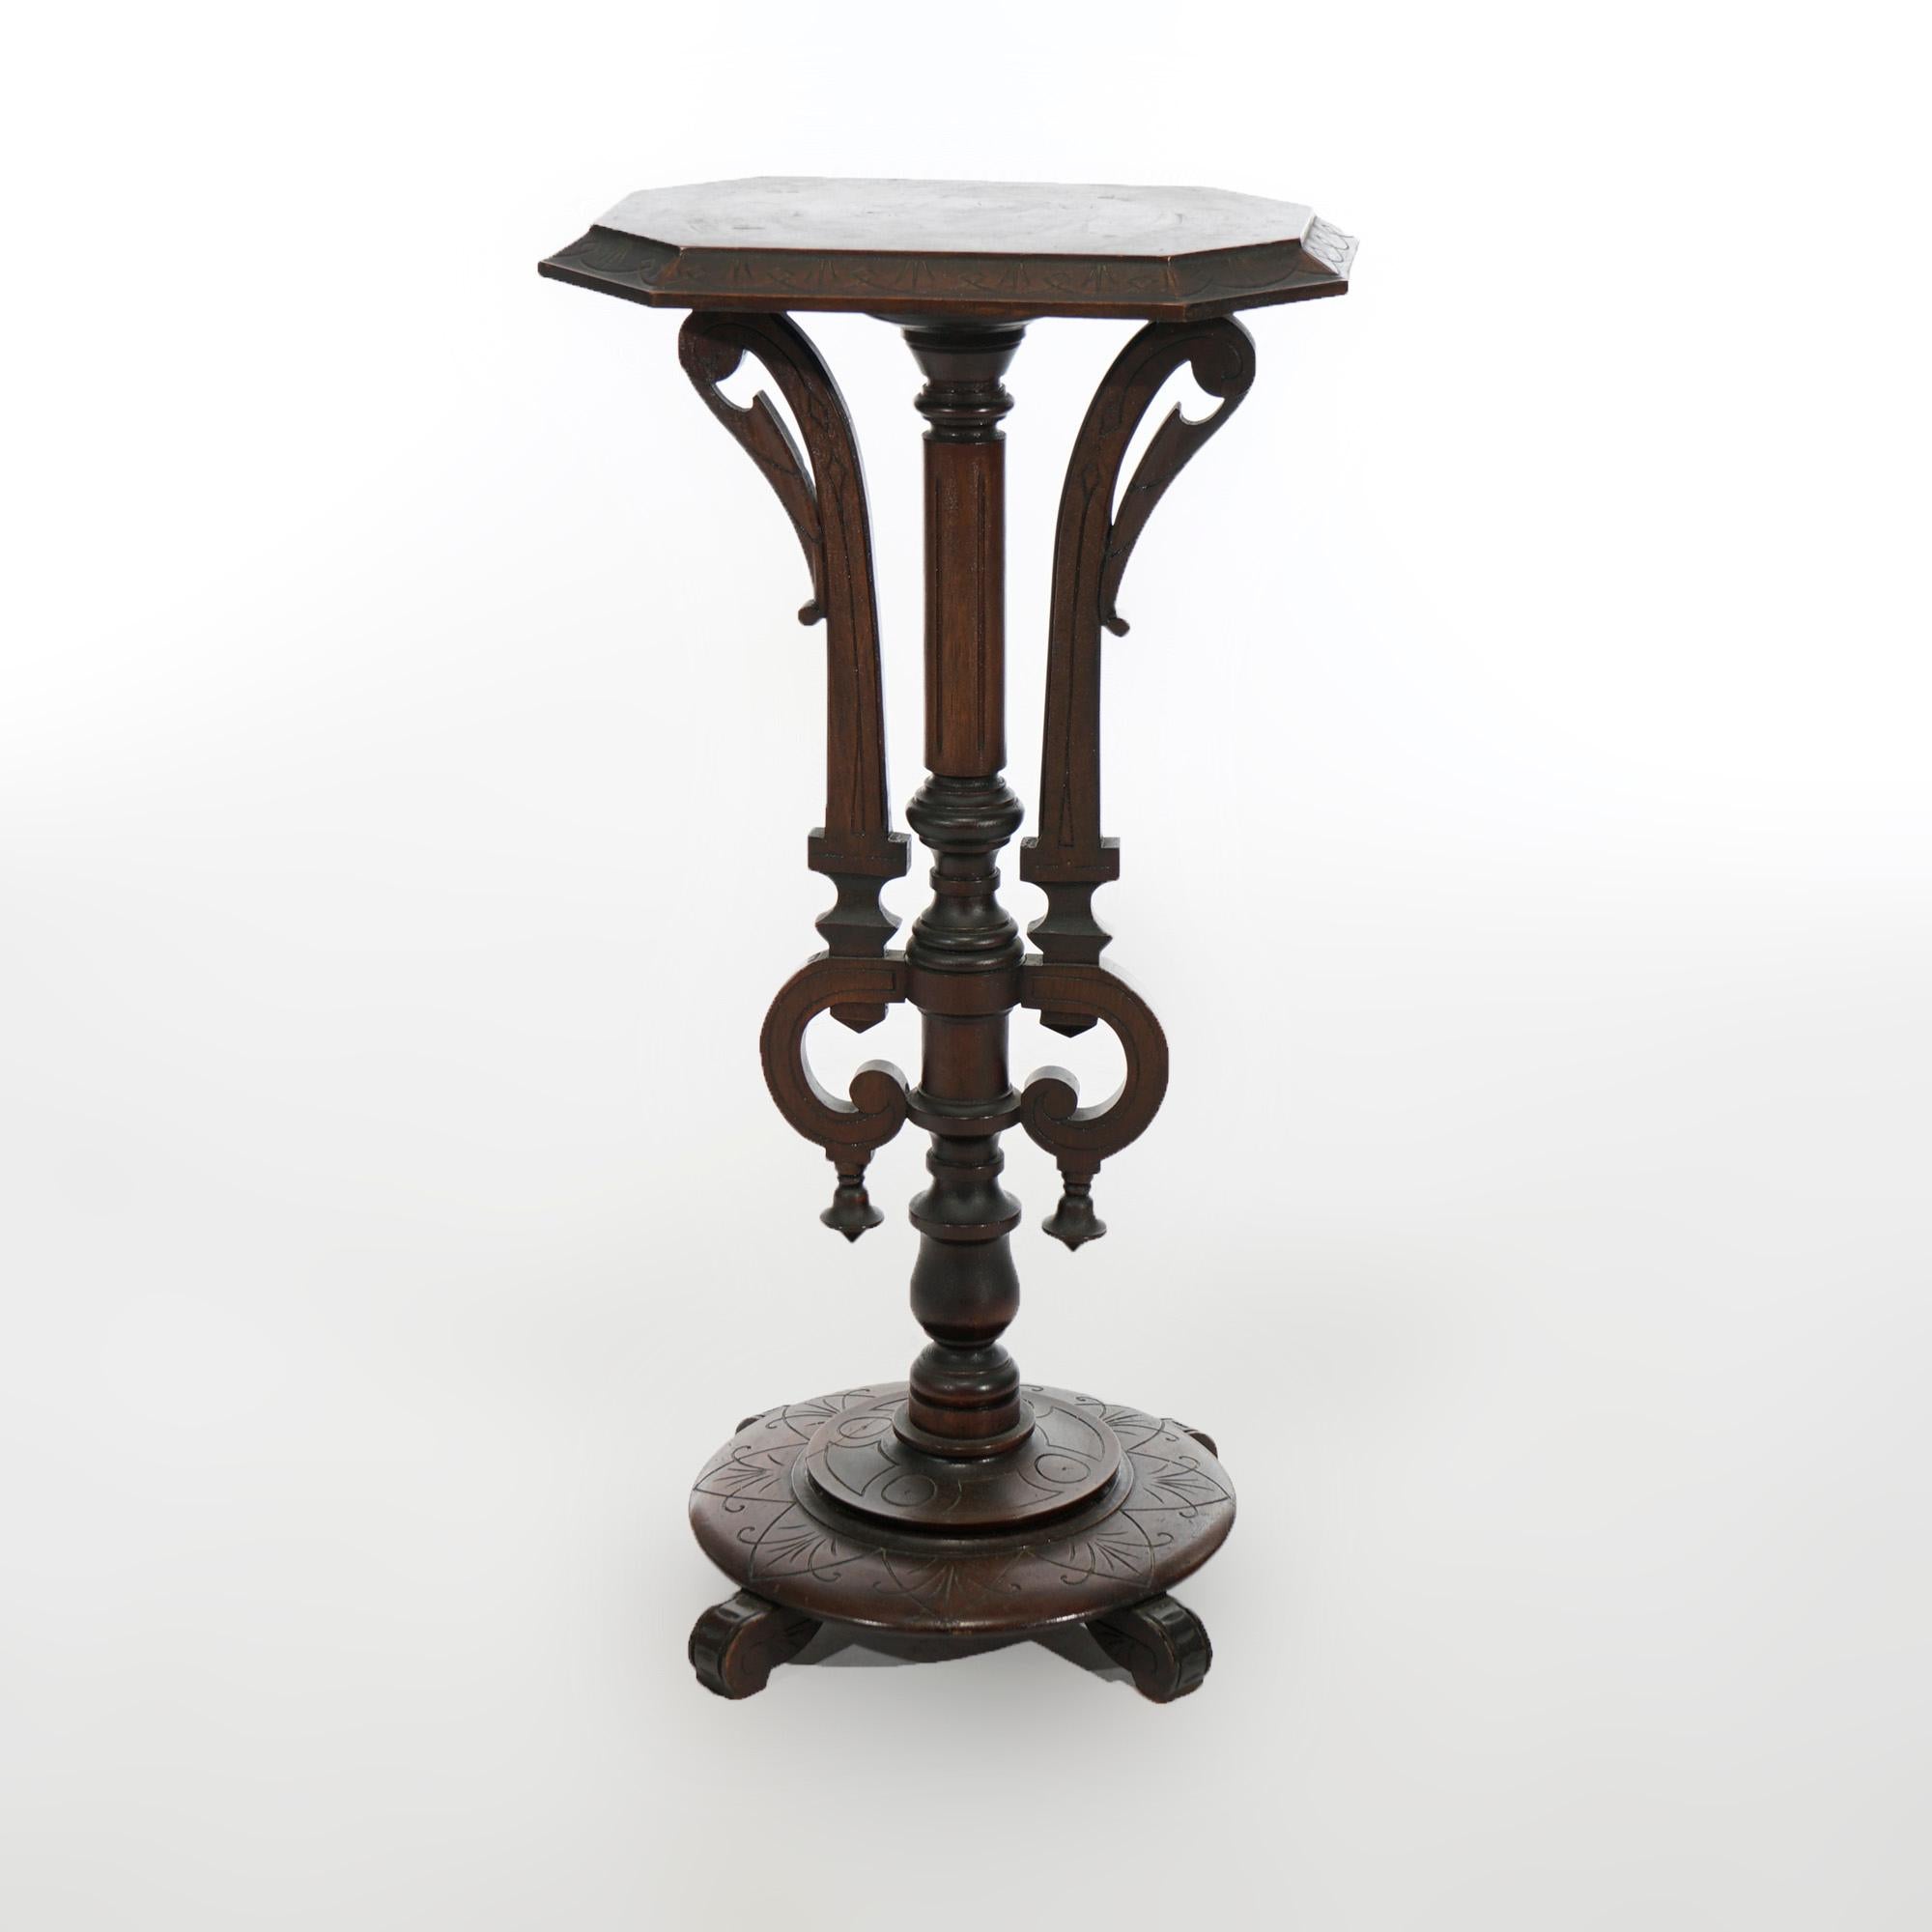 An antique Aesthetic Movement sculpture pedestal offers walnut construction with beveled rectangular display over turned column having flanking scroll elements raised on bae with stylized scroll feet, c1890

Measures- 34''H x 18''W x